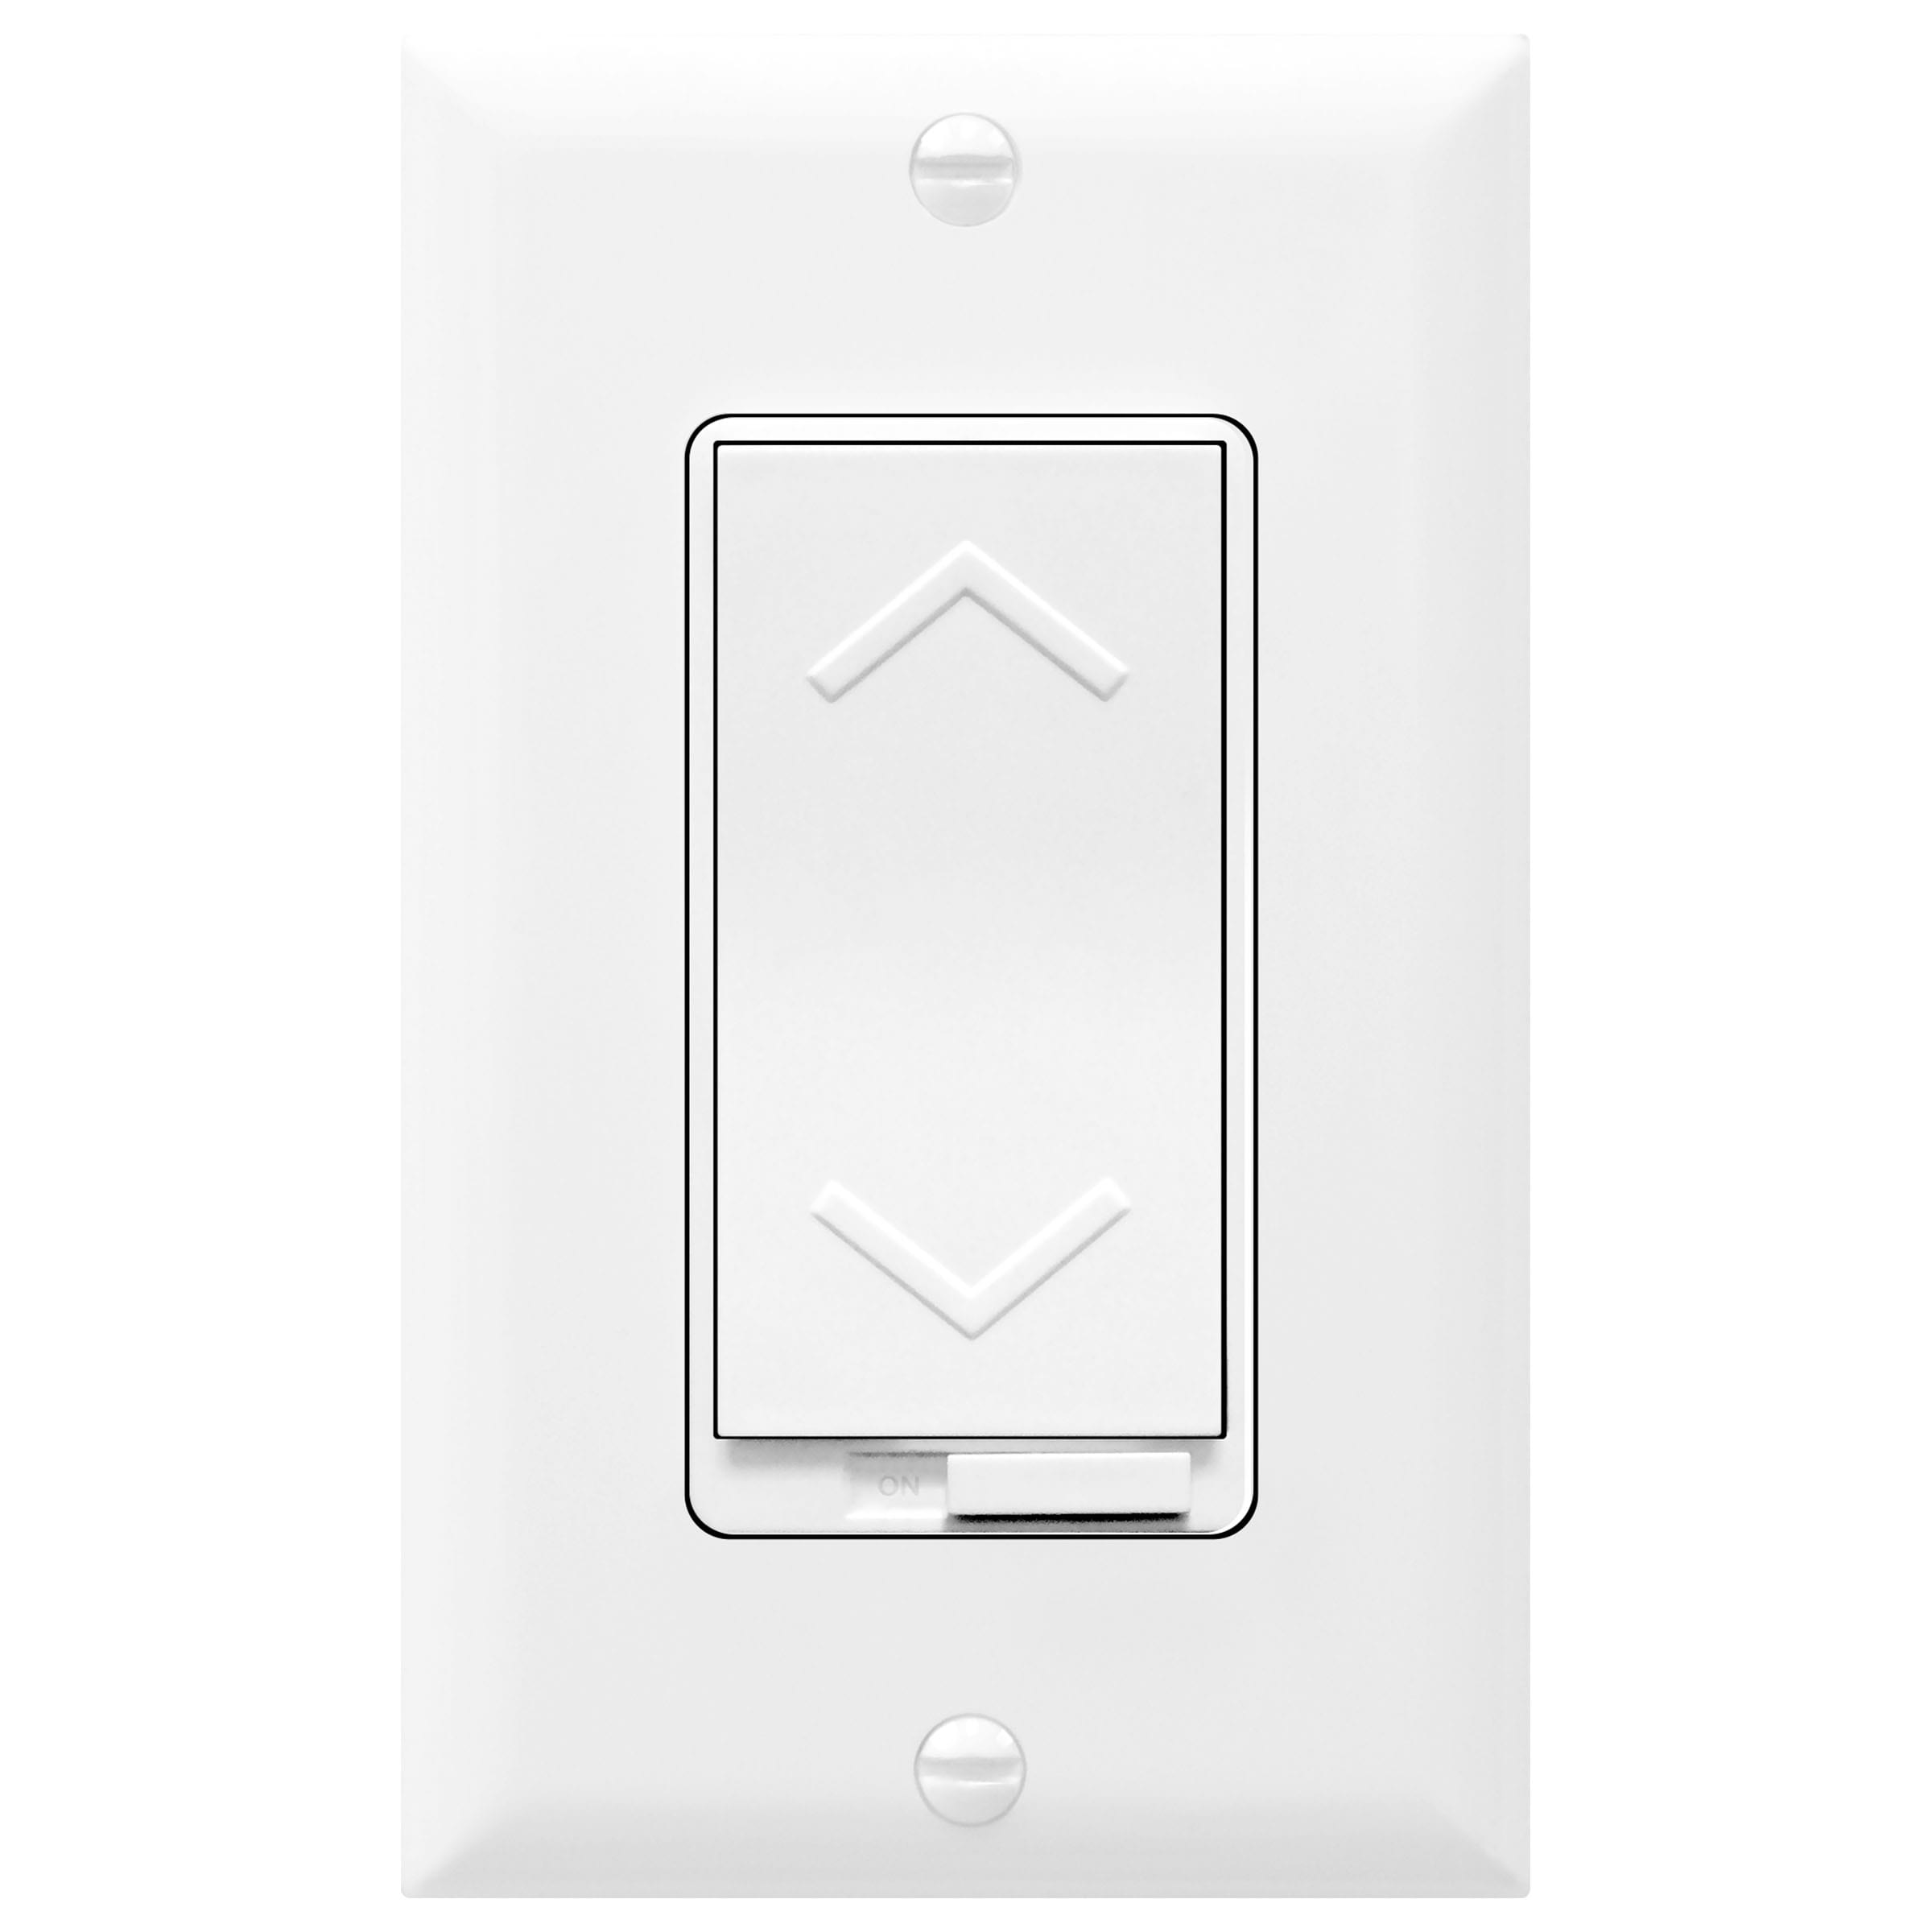 3-Way/4-Way Decorator Dimmer Add-On Switch (Works with TGDS-120 Only)